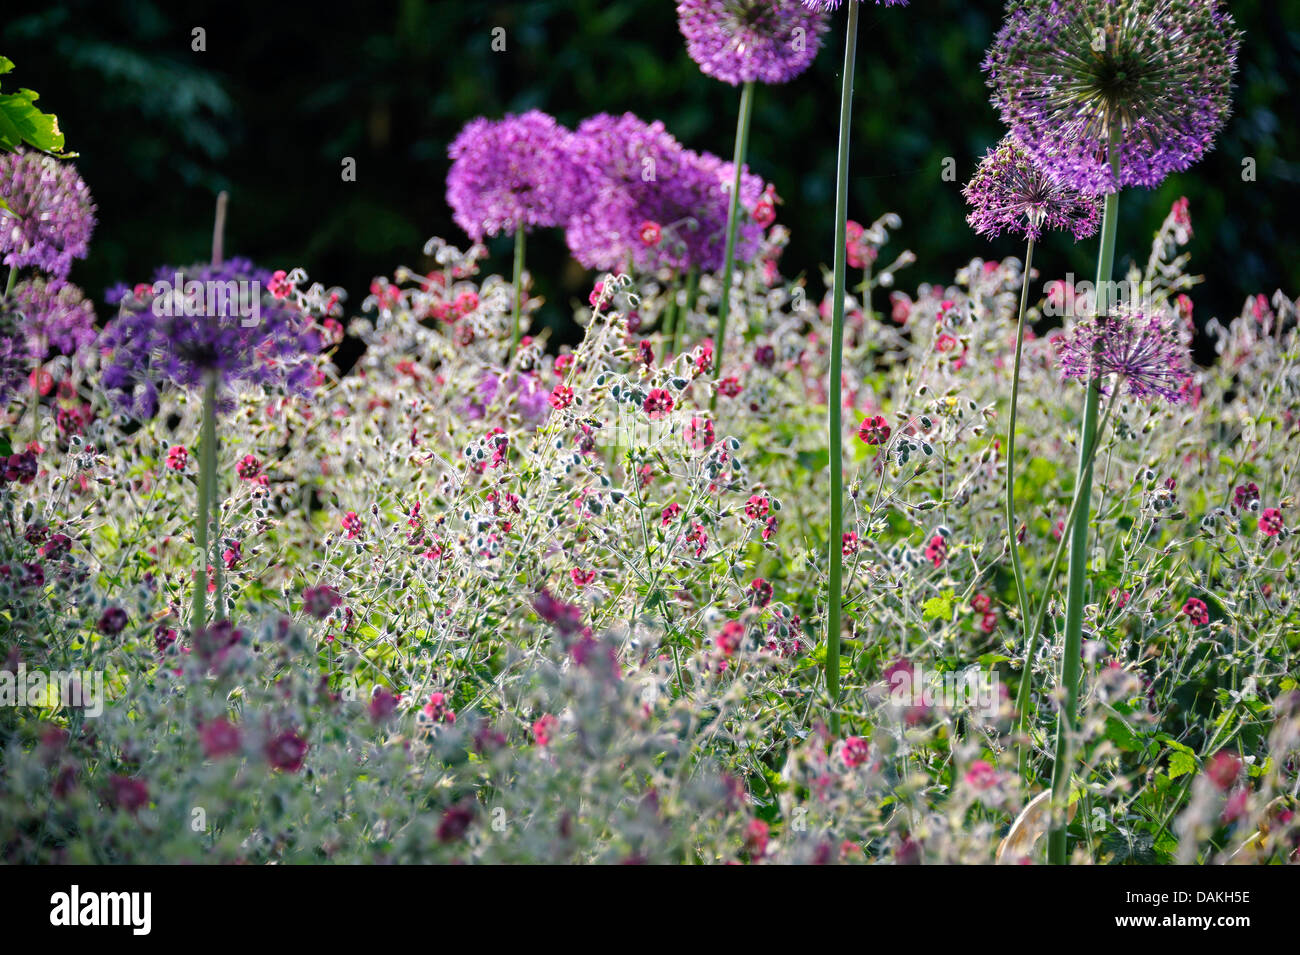 dusky cranesbill (Geranium phaeum), blooming in a flowerbed together with Allium aflatunense, Germany Stock Photo